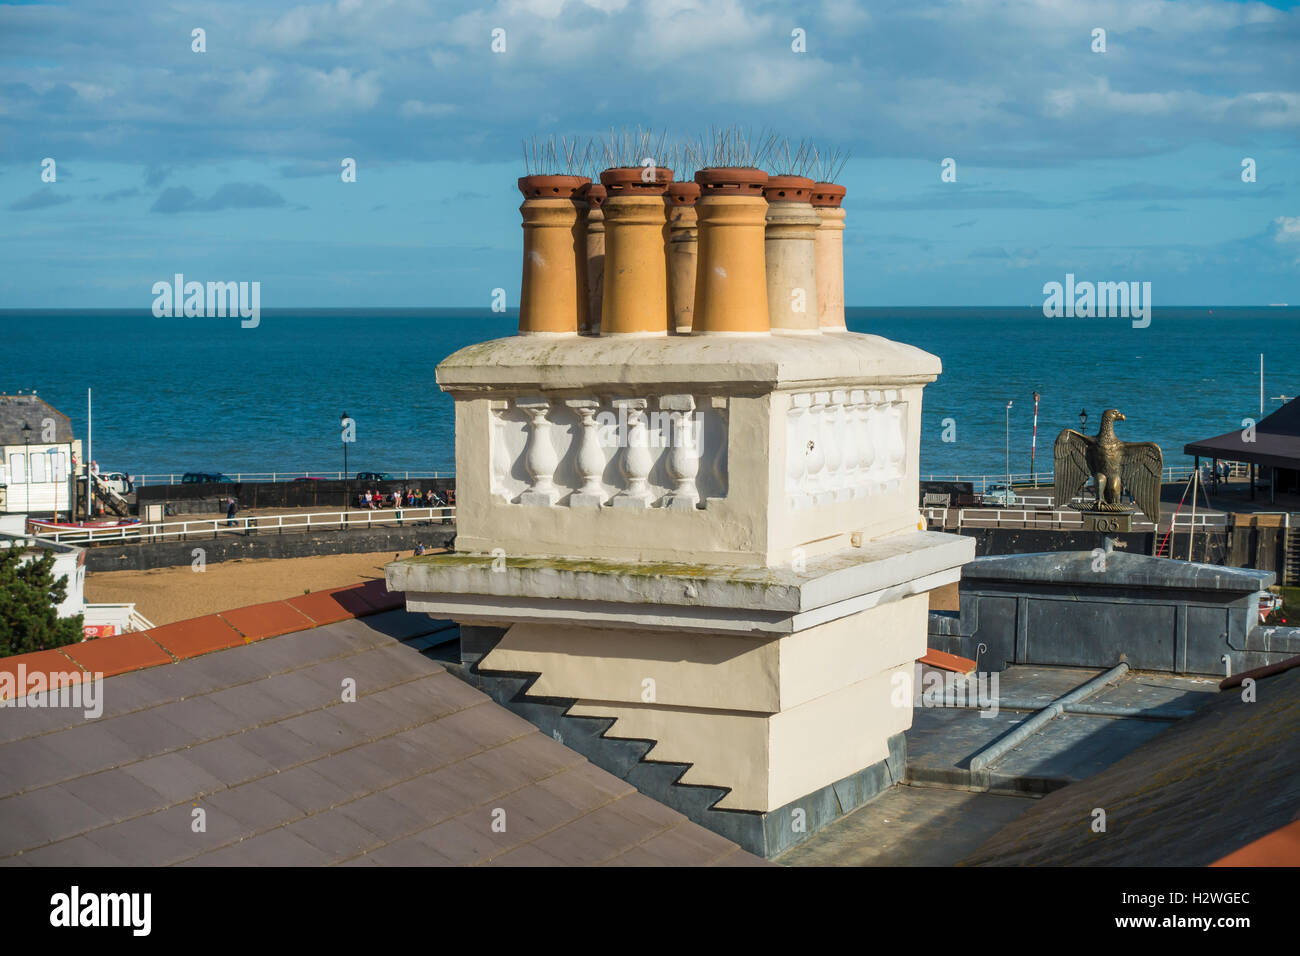 Multi Pot Chimney with Bird Deterent Spikes Fitted Stock Photo